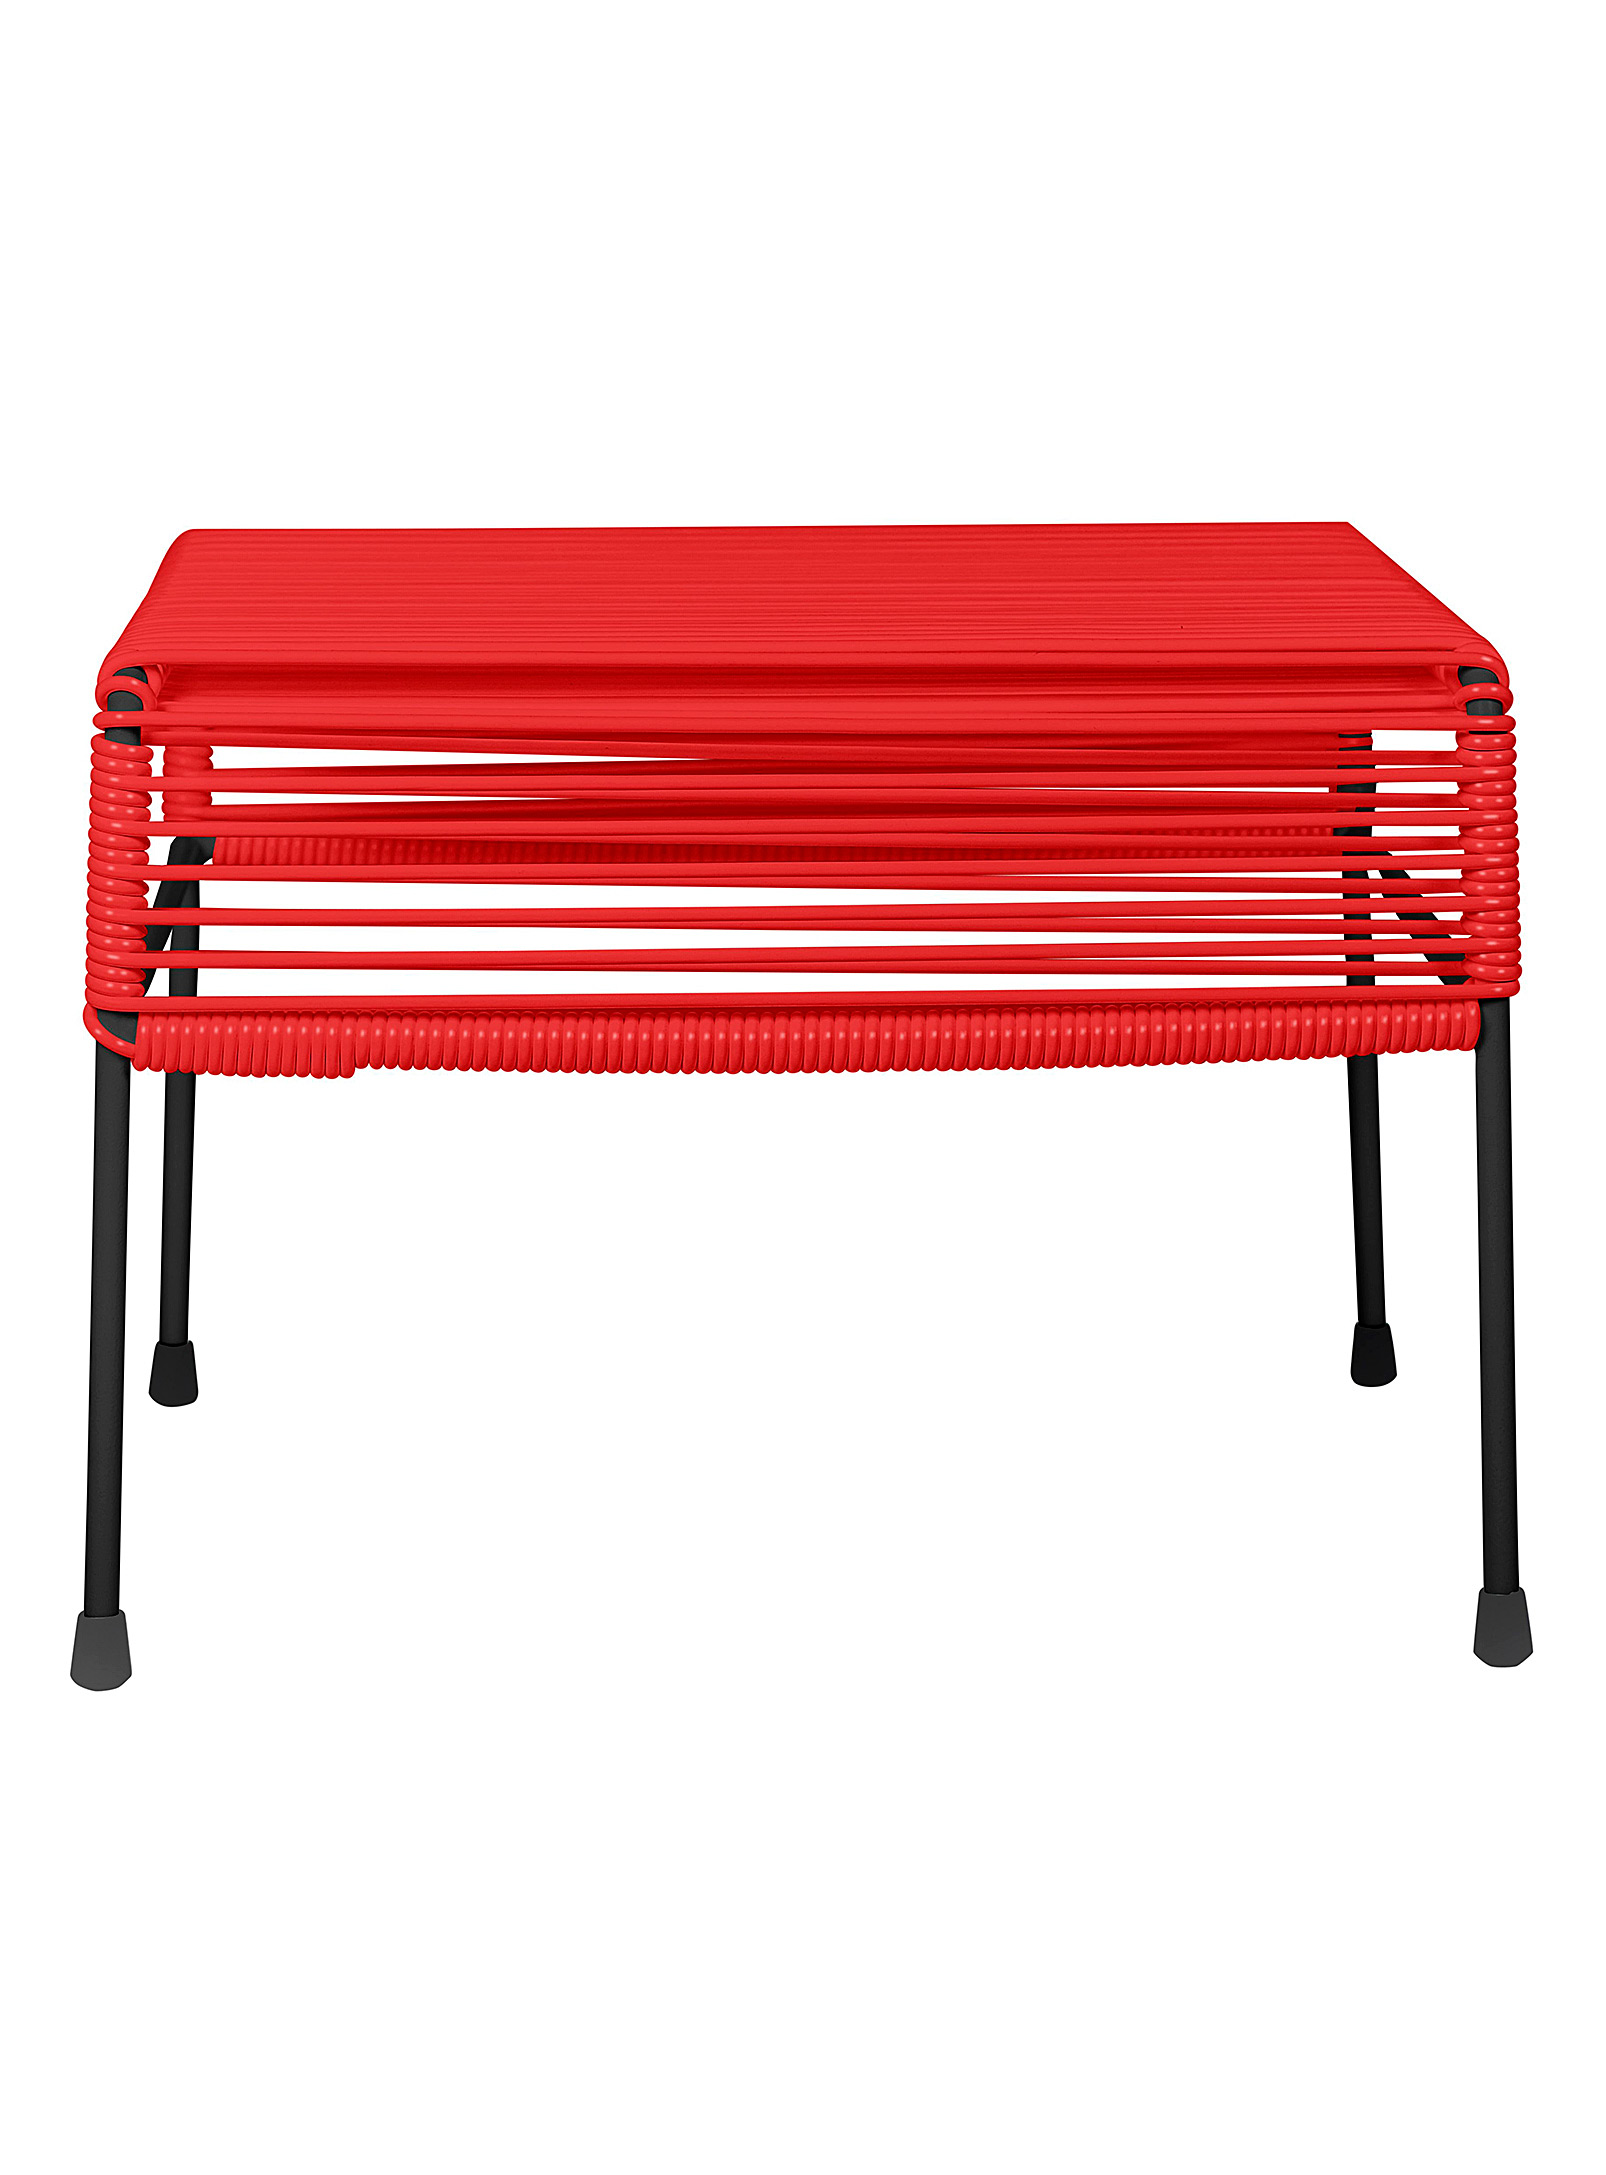 Simons Maison Atom Small Outdoor Table In Red